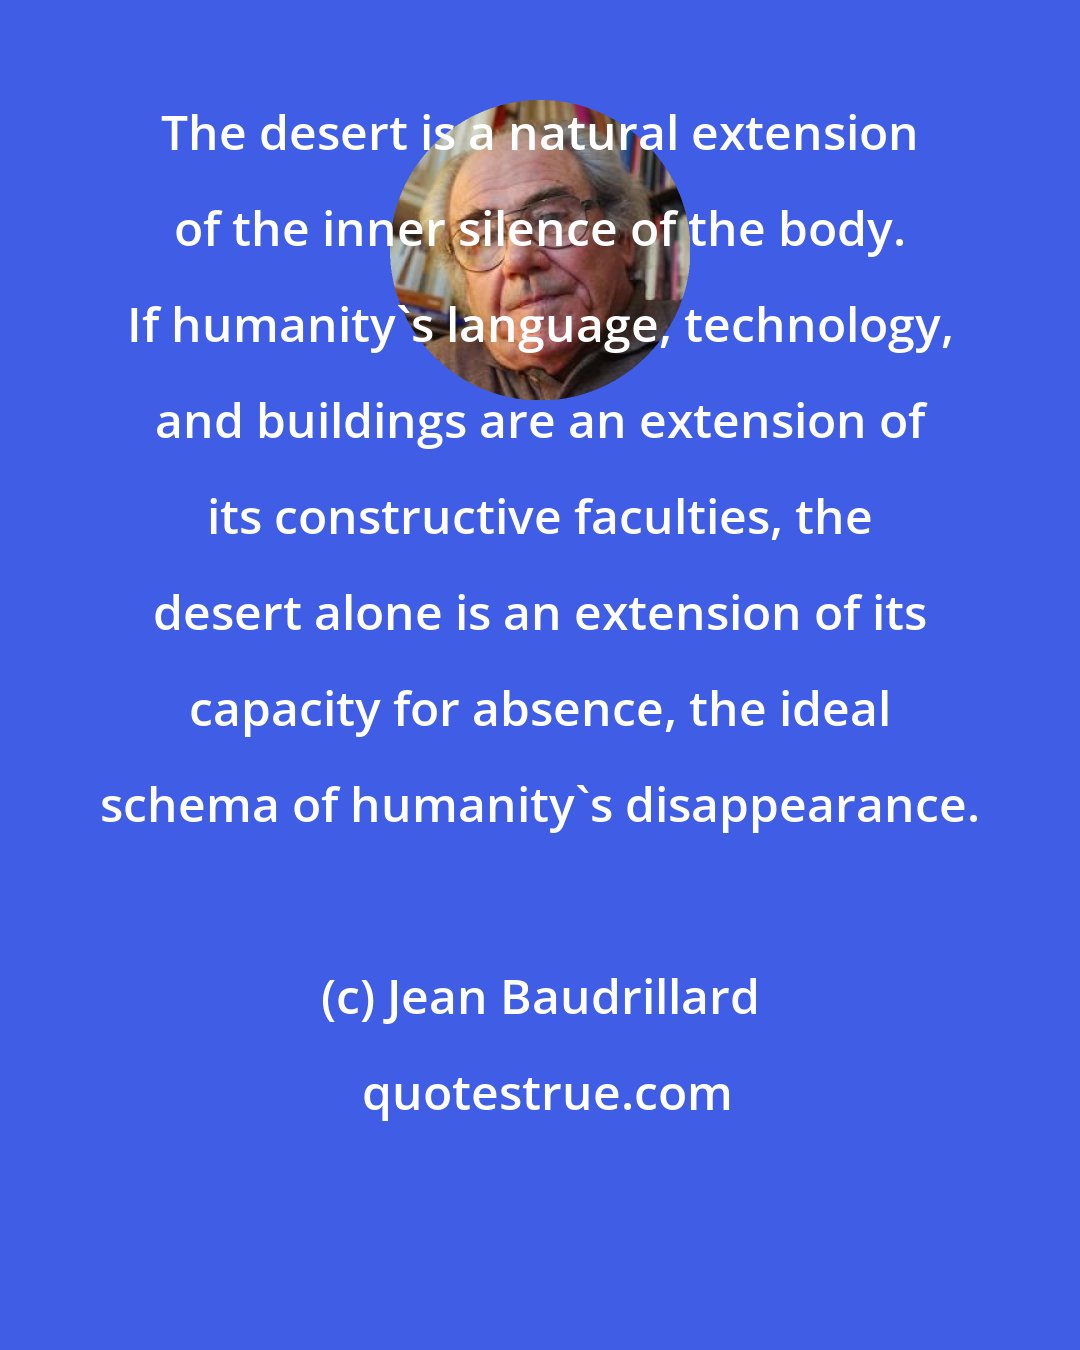 Jean Baudrillard: The desert is a natural extension of the inner silence of the body. If humanity's language, technology, and buildings are an extension of its constructive faculties, the desert alone is an extension of its capacity for absence, the ideal schema of humanity's disappearance.